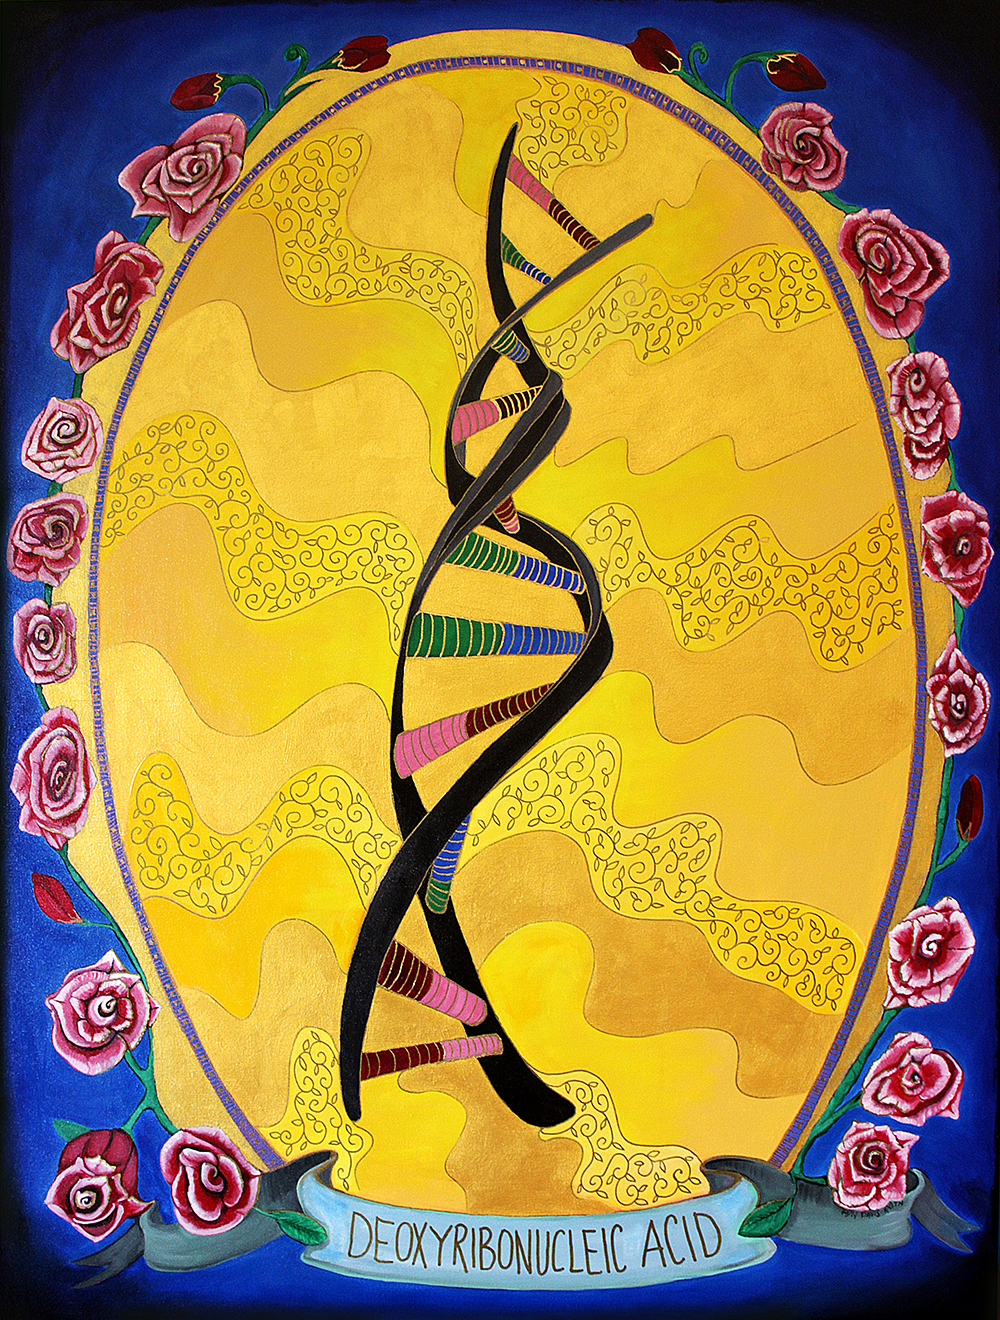 A strand of DNA on a yellow background surrounded by roses